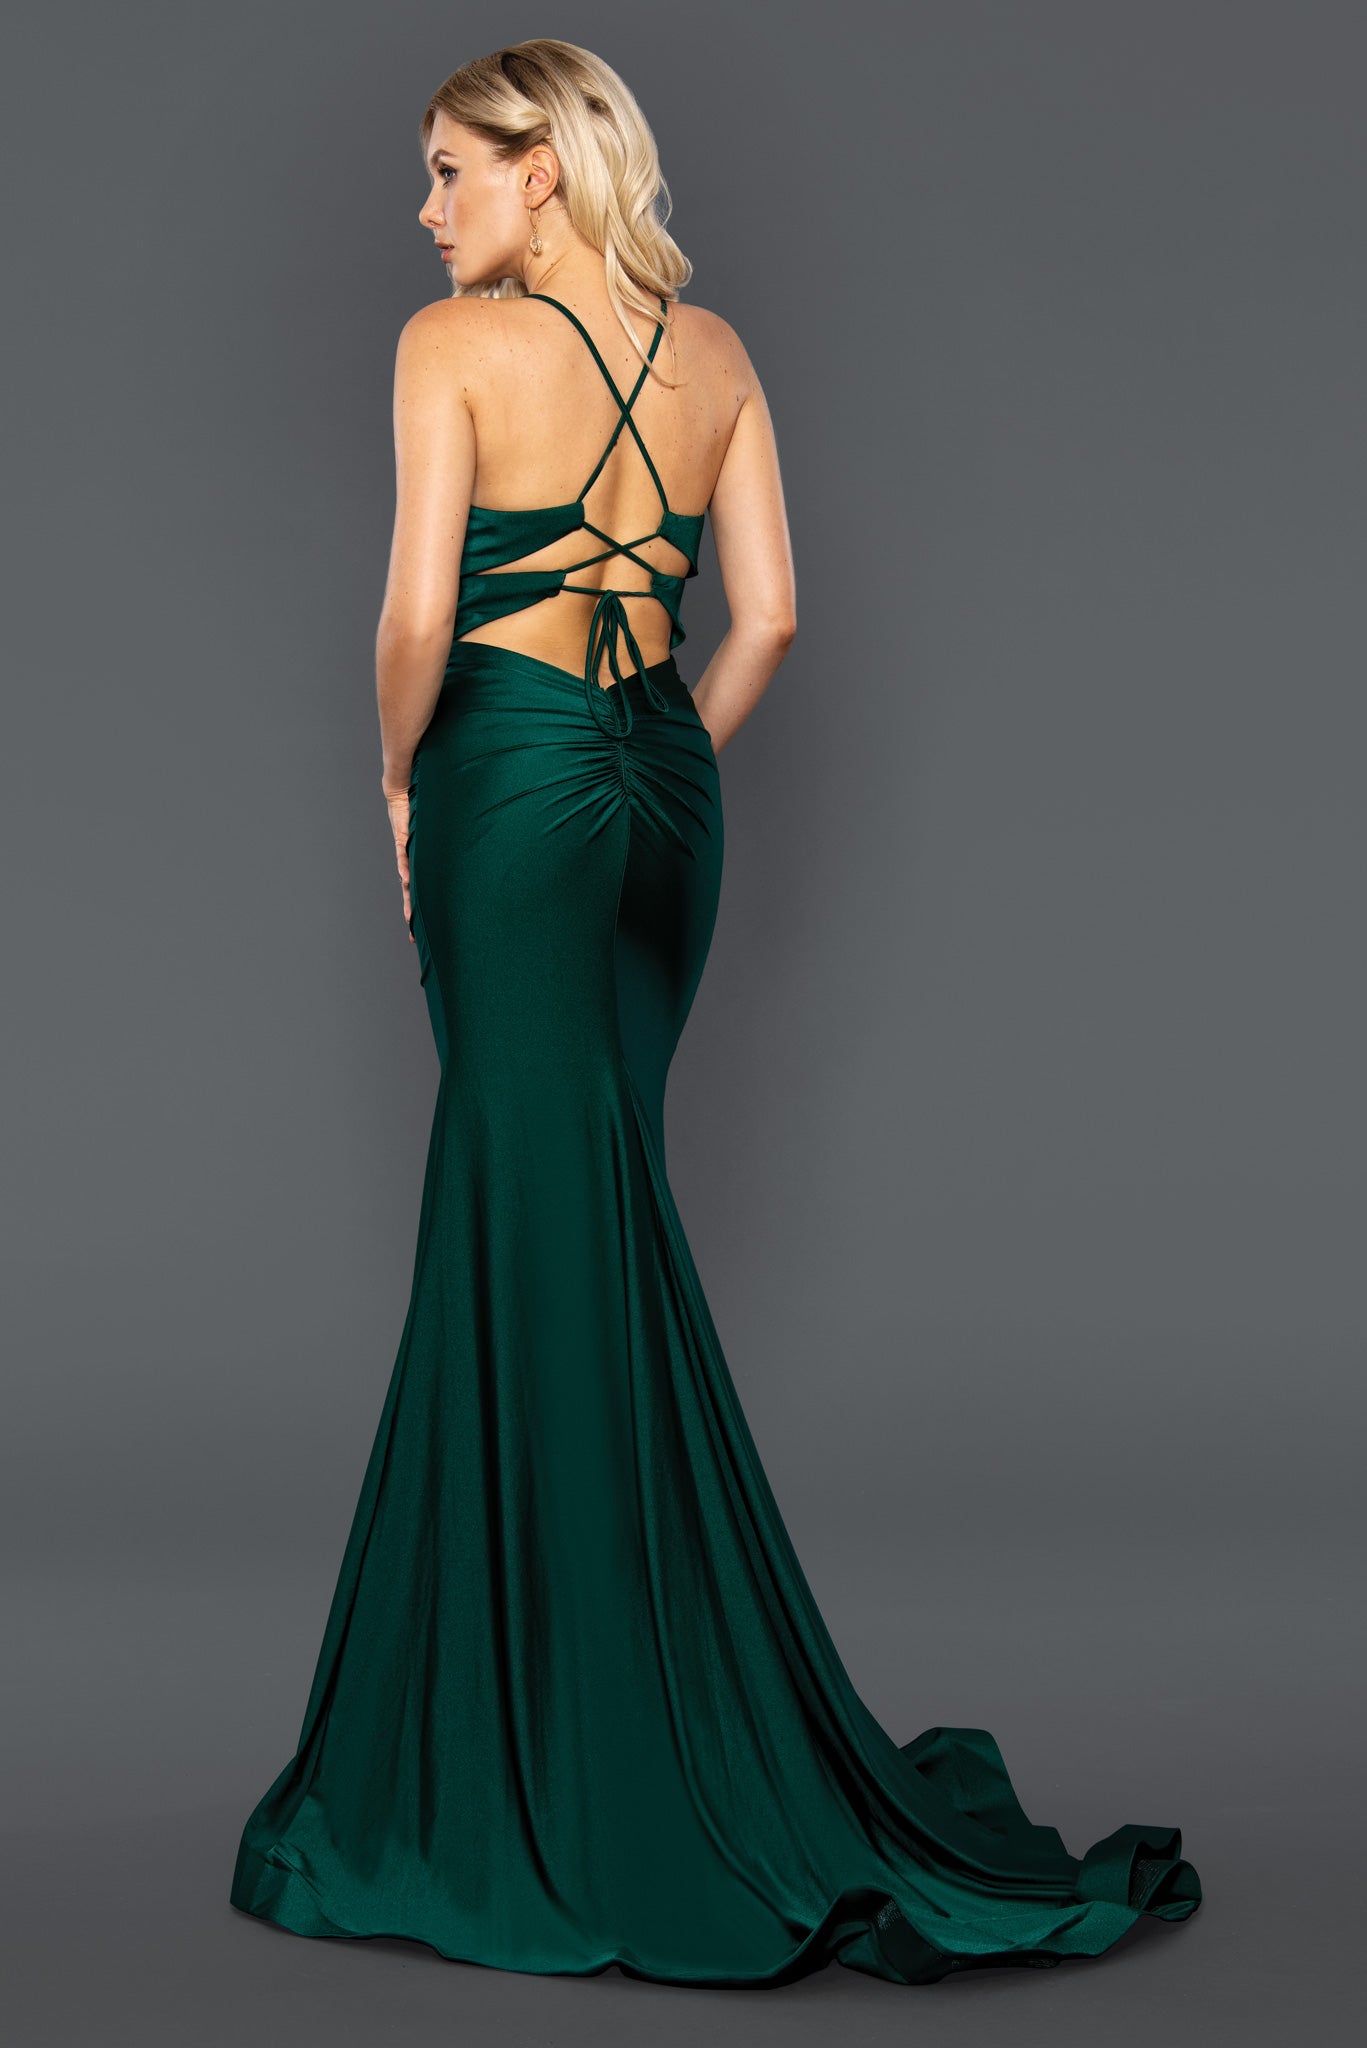 Stella Couture 22037 Long Fitted Ruched Prom Dress Formal Evening Gown Slit backles corset  Available Sizes: 0-12  Available Colors: Hunter Green, Red